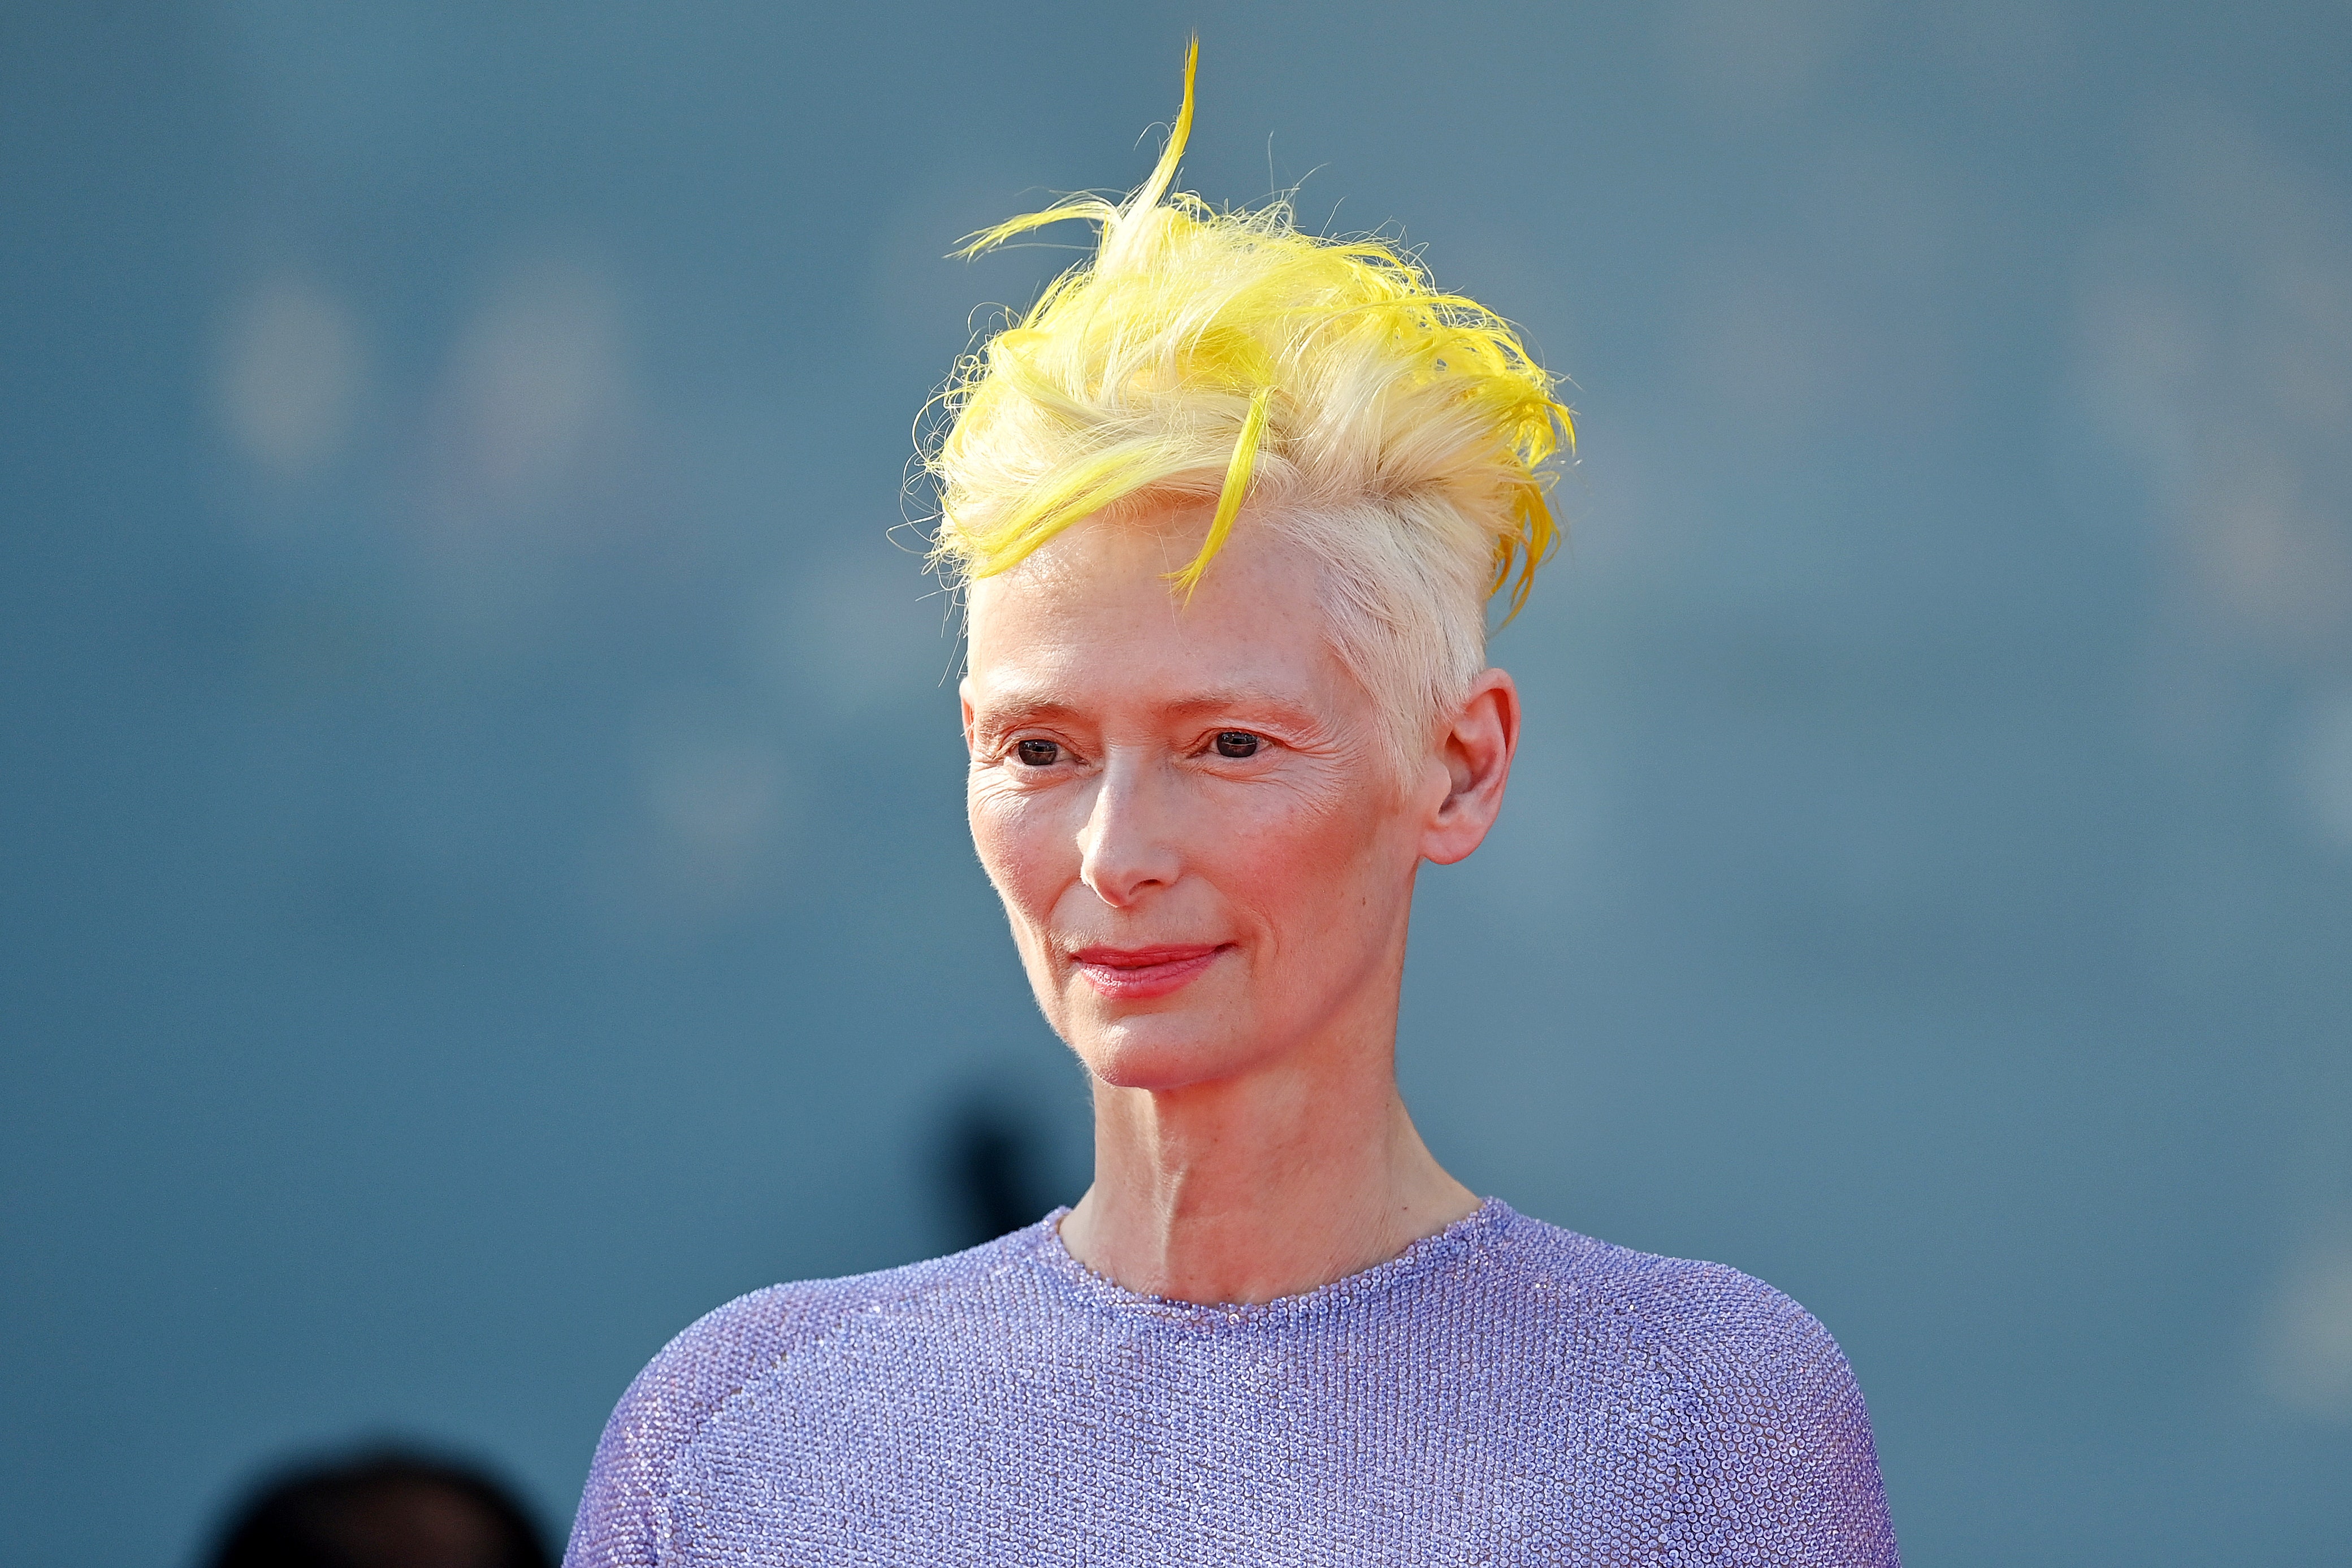 Tilda swintons neon yellow hair in venice holds a deeper meaning